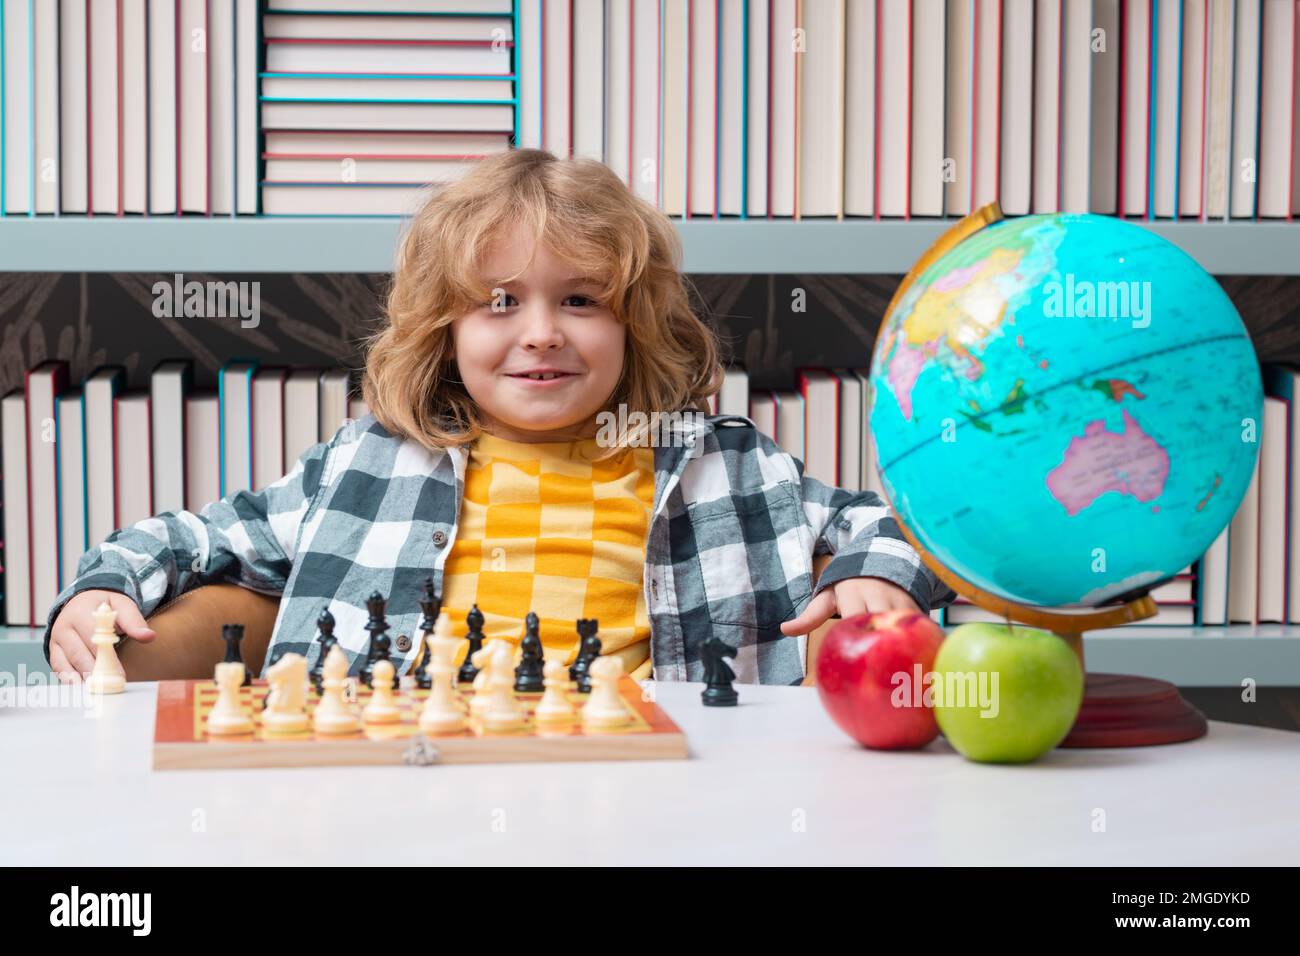 Chess school. Clever concentrated and thinking kid playing chess. Kids brain development and logic game. Stock Photo